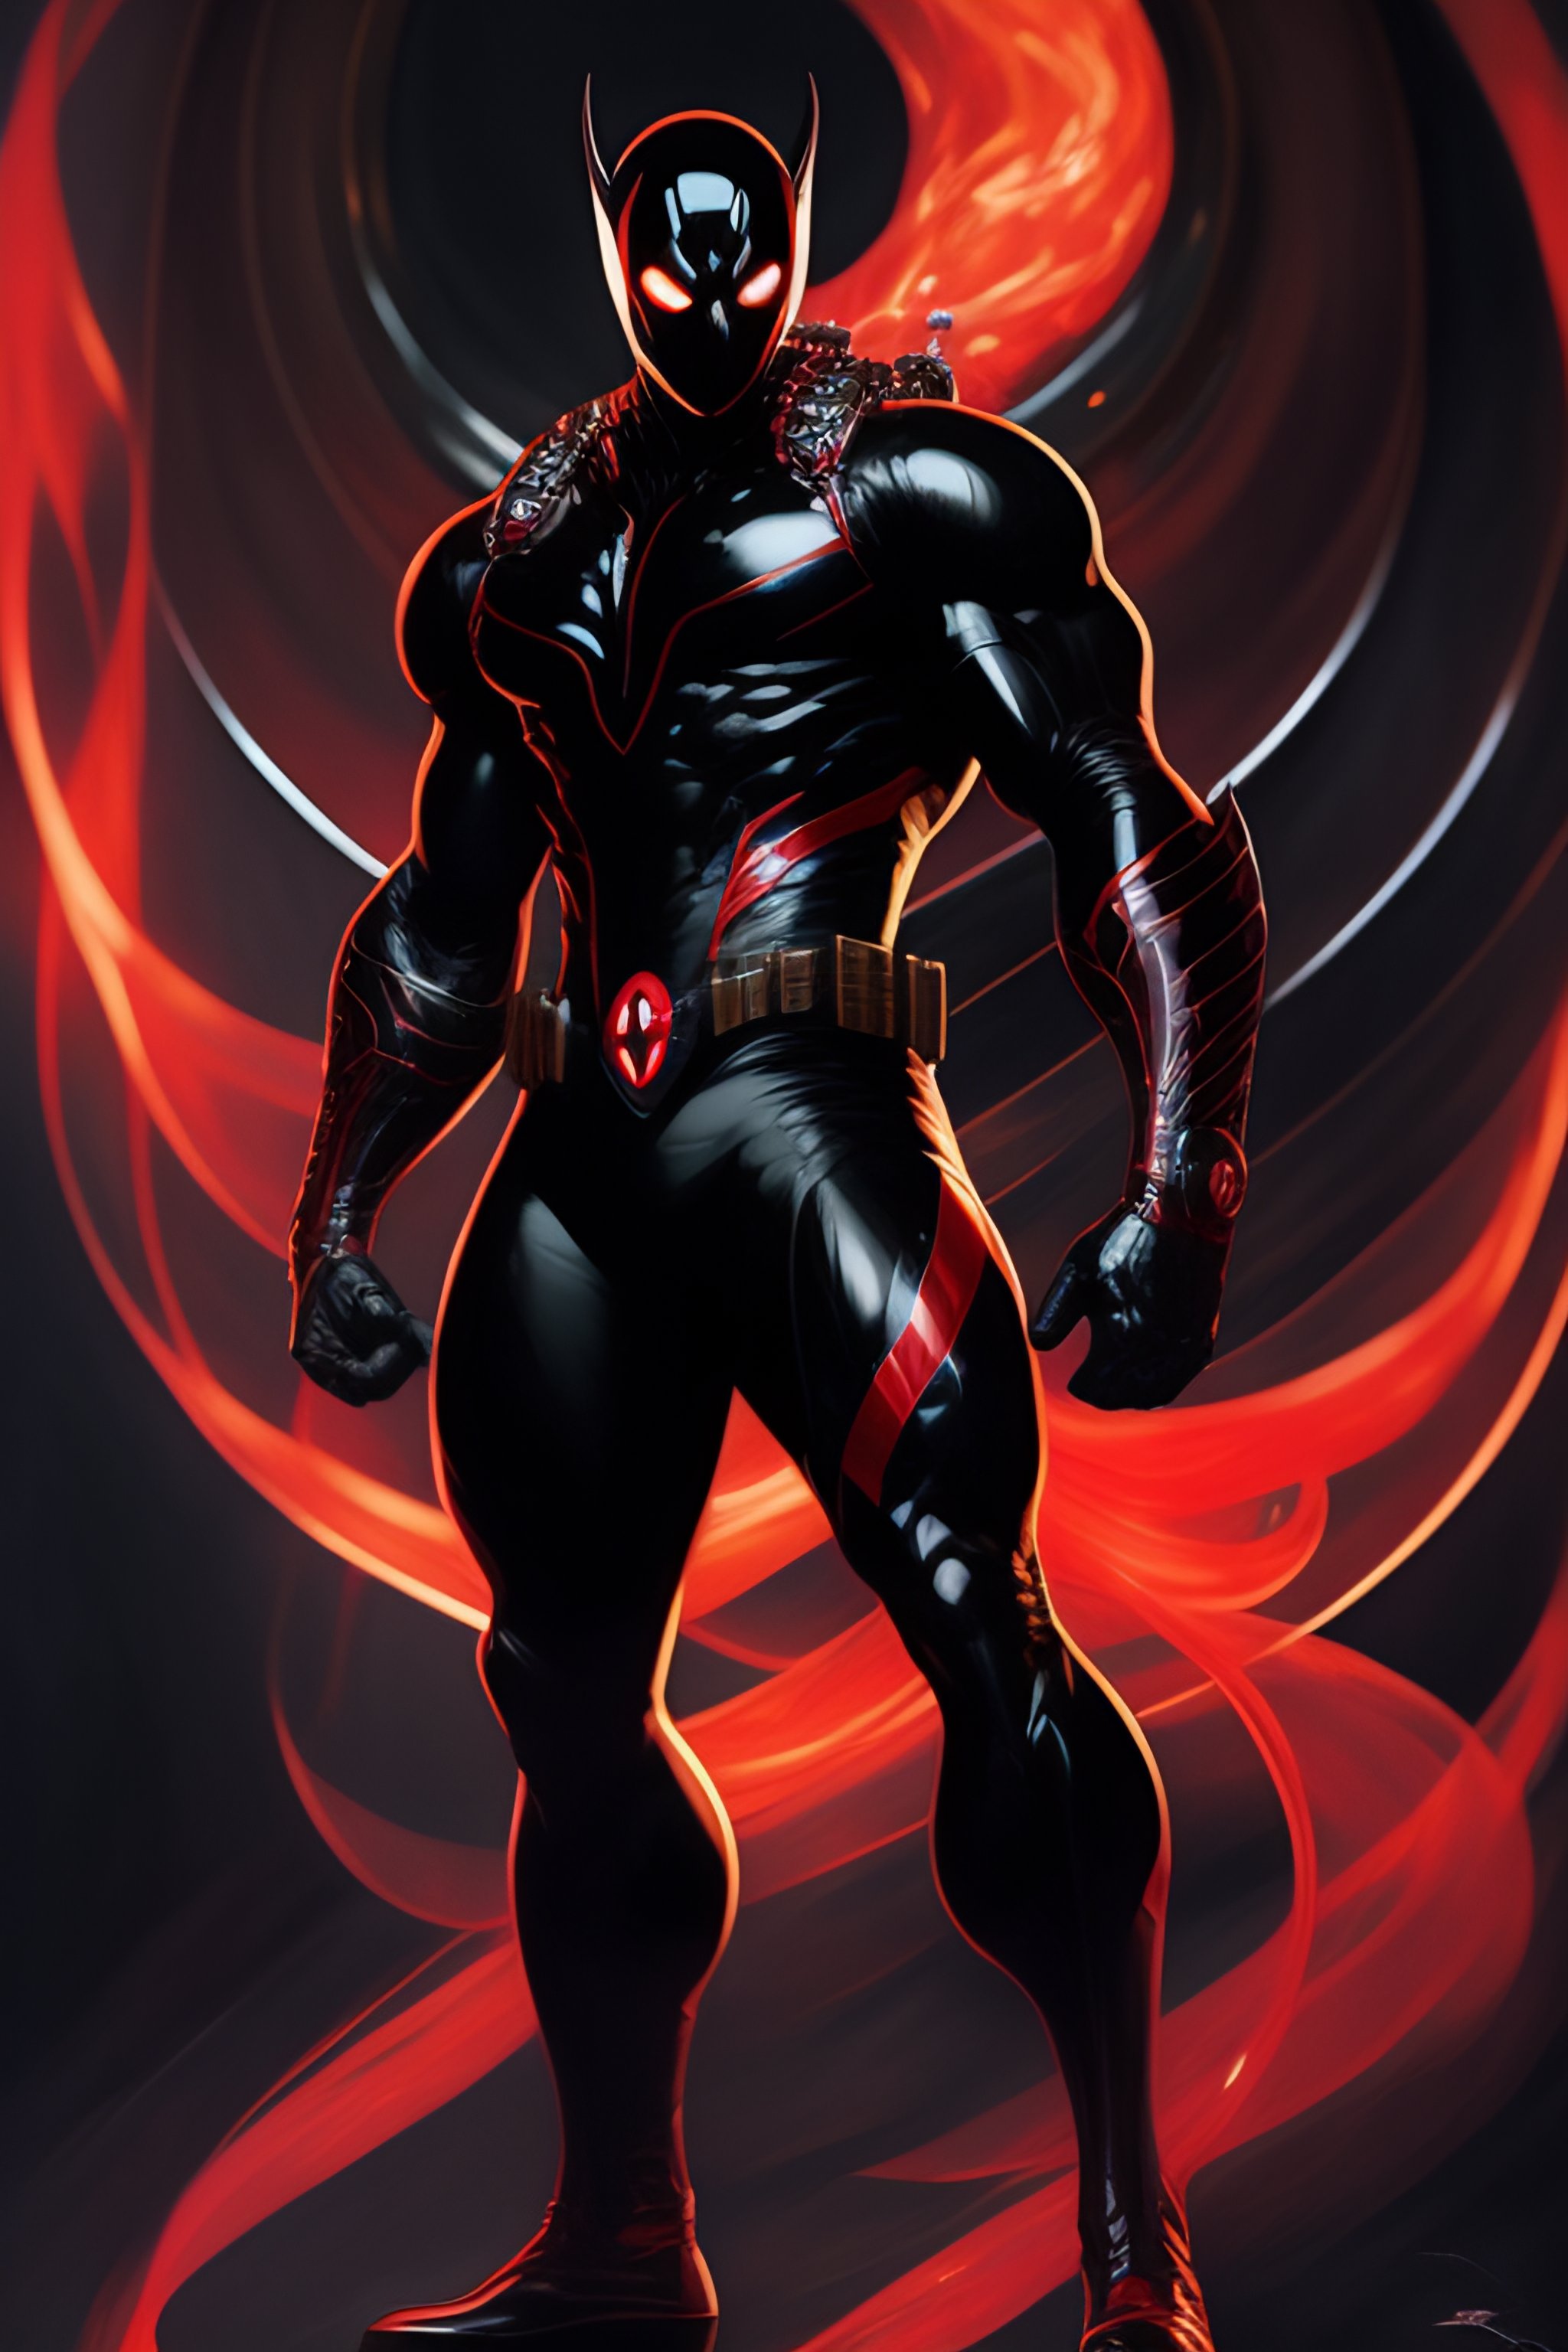 Lexica - Full body portrait of Venom symbiote appears as a black and red  suit that seems to pulsate and flow around Deadpool's body. It enhances his